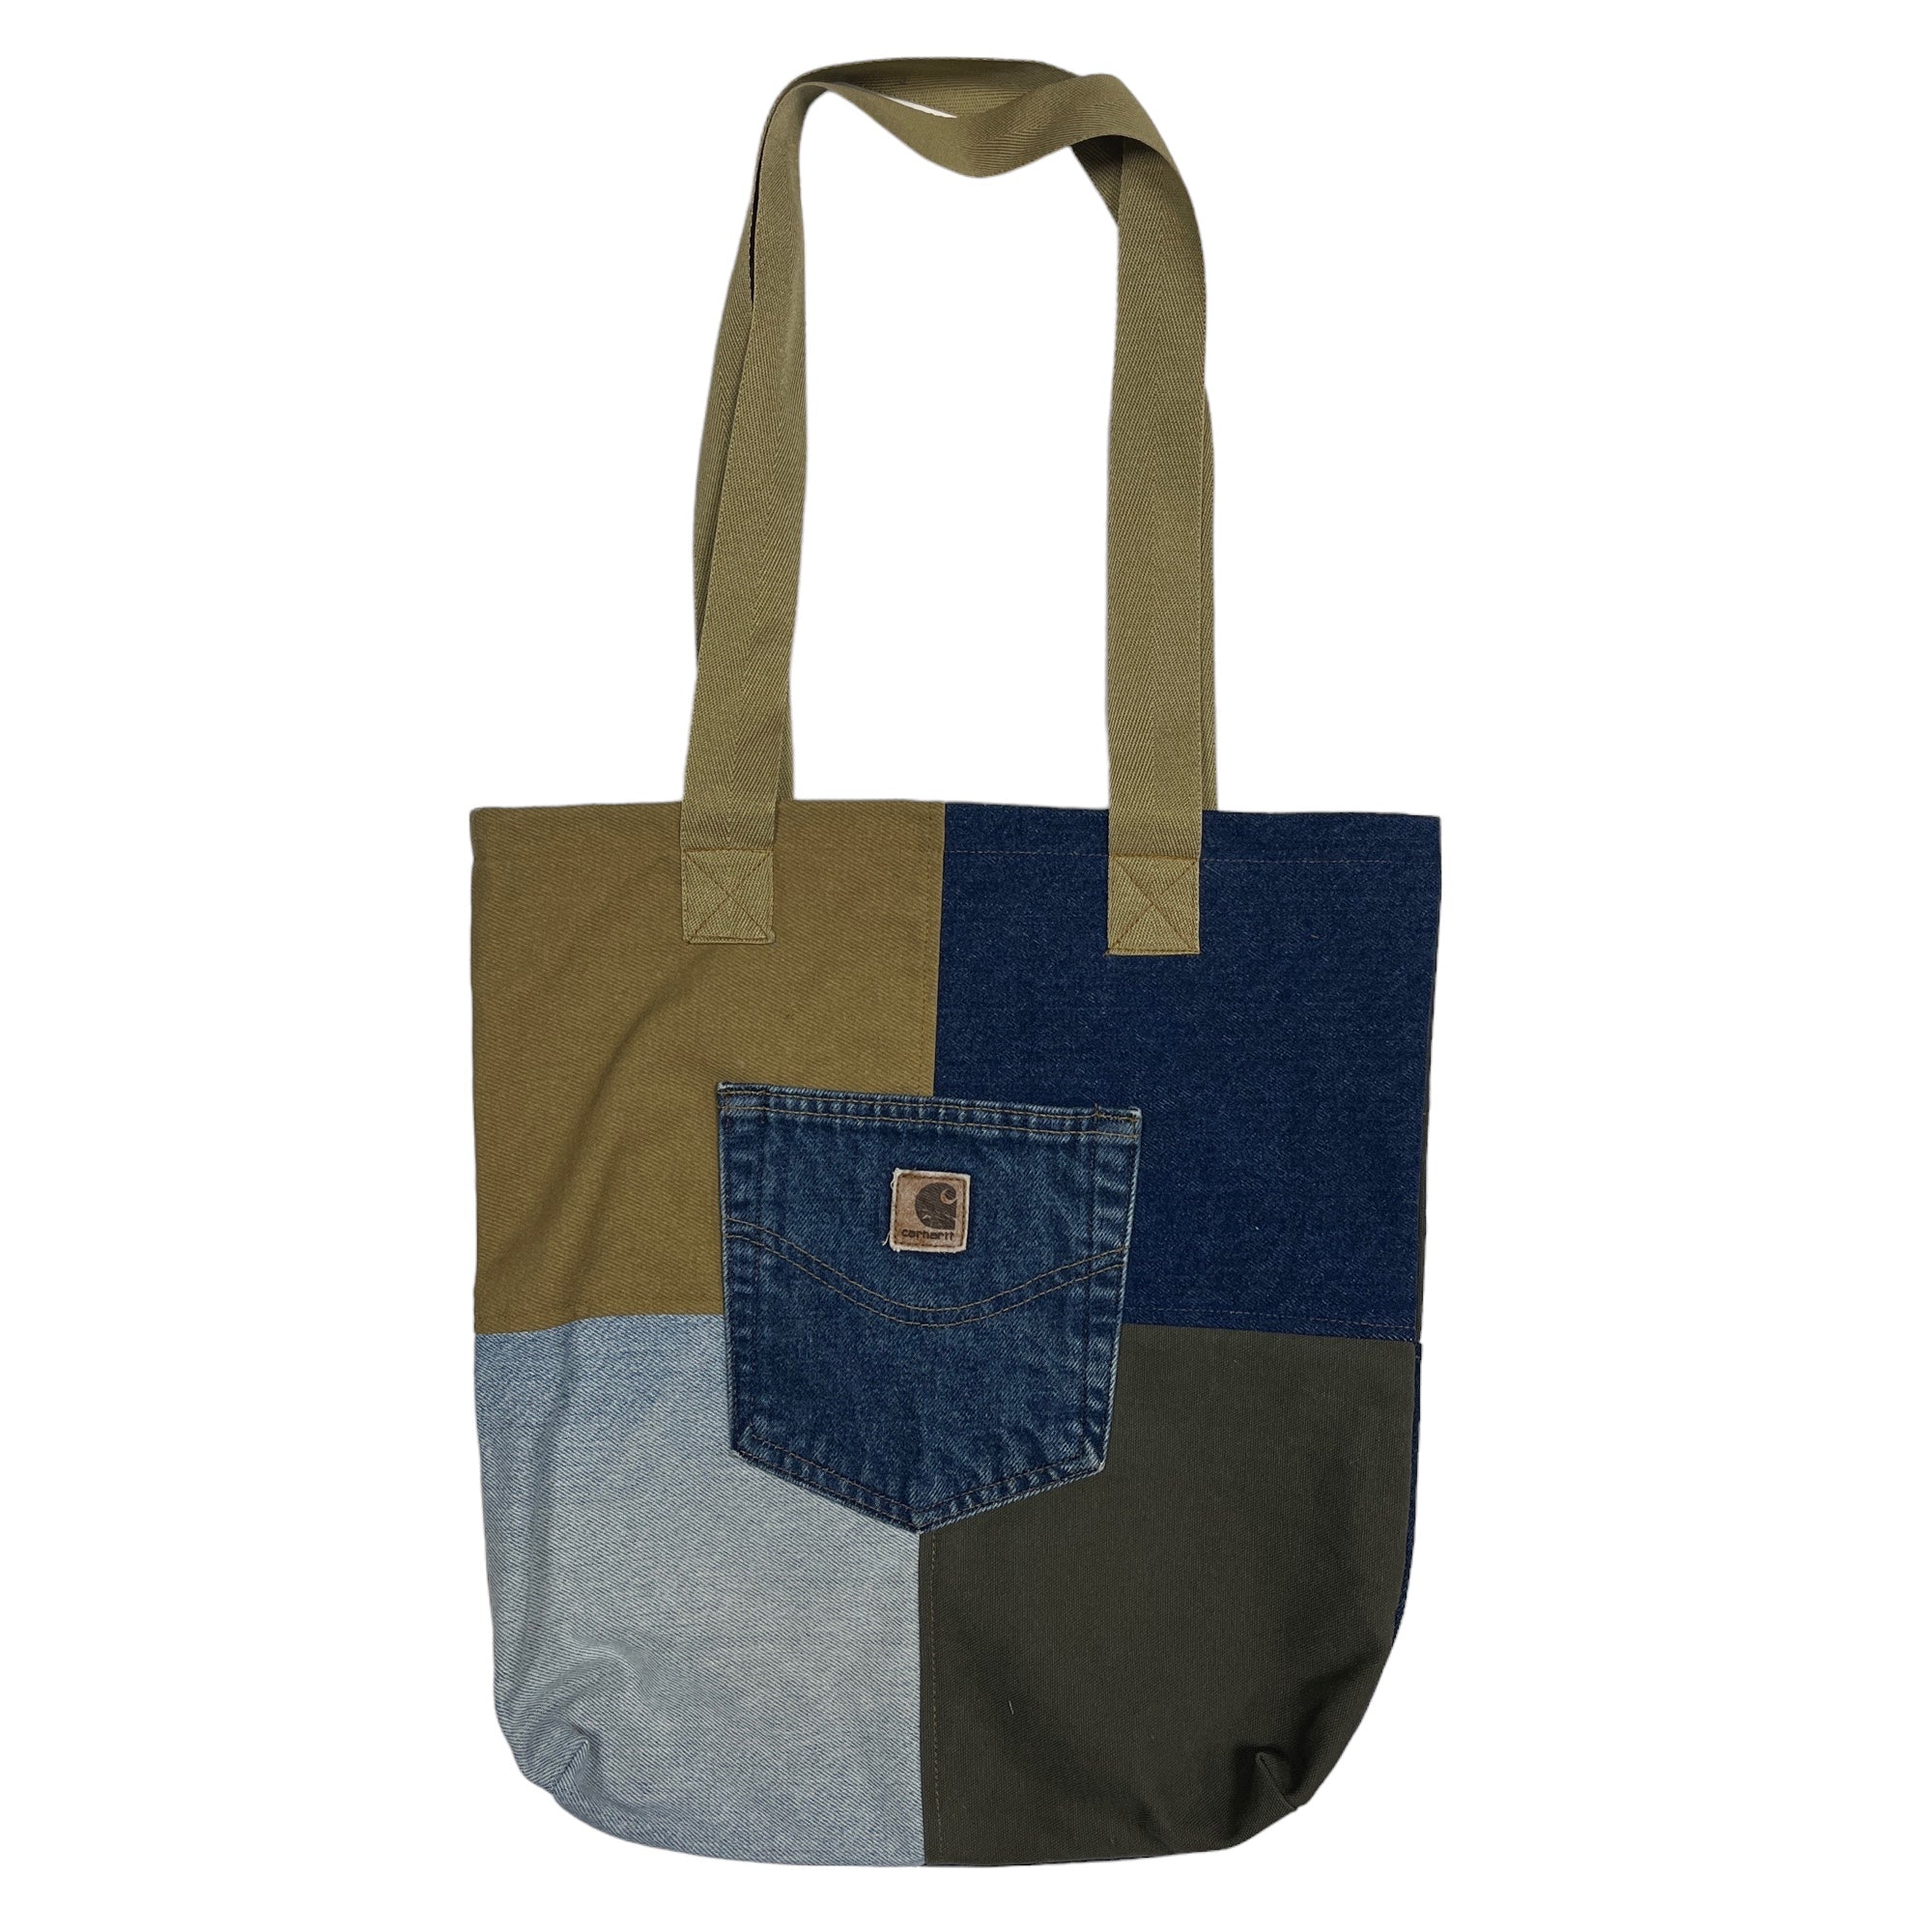 Reowrked Carhartt Tote Bag